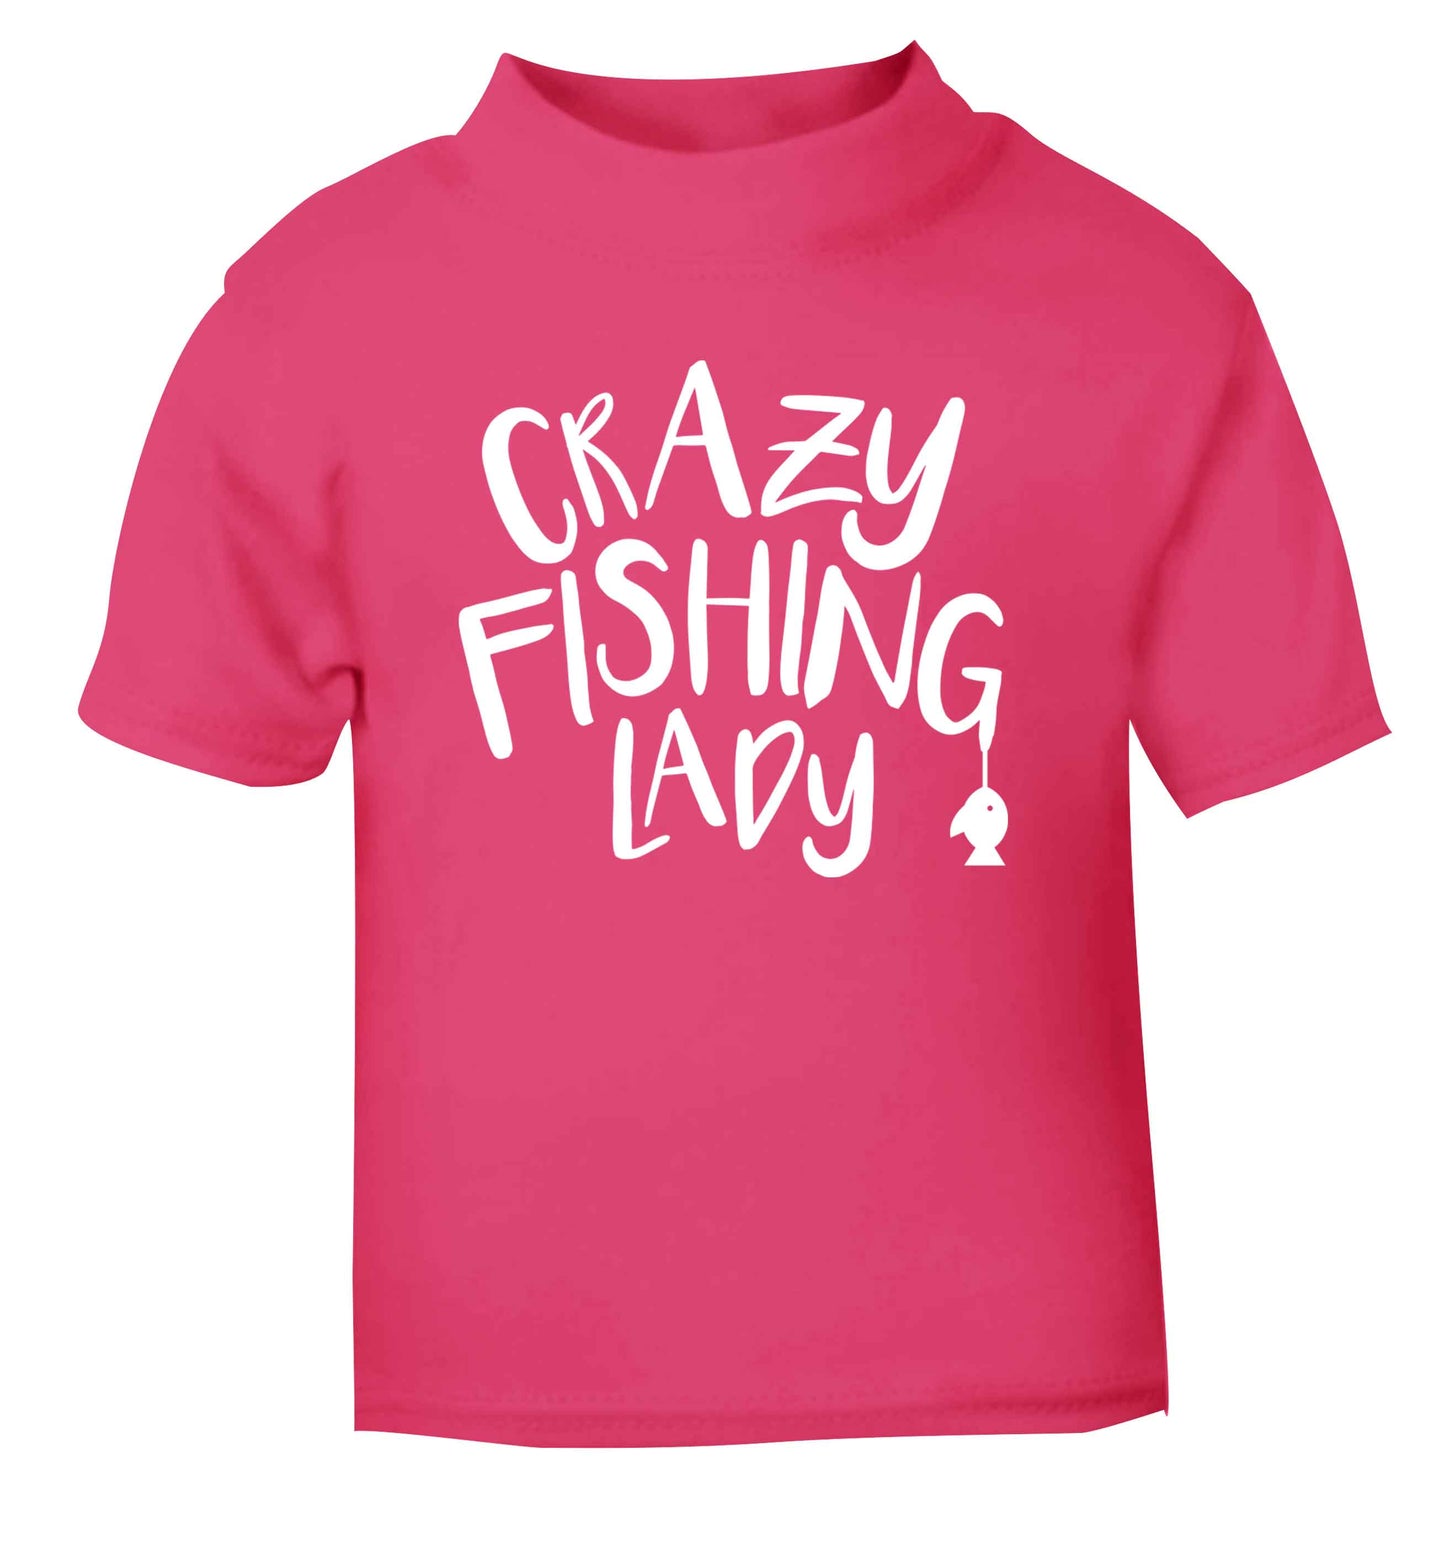 Crazy fishing lady pink Baby Toddler Tshirt 2 Years